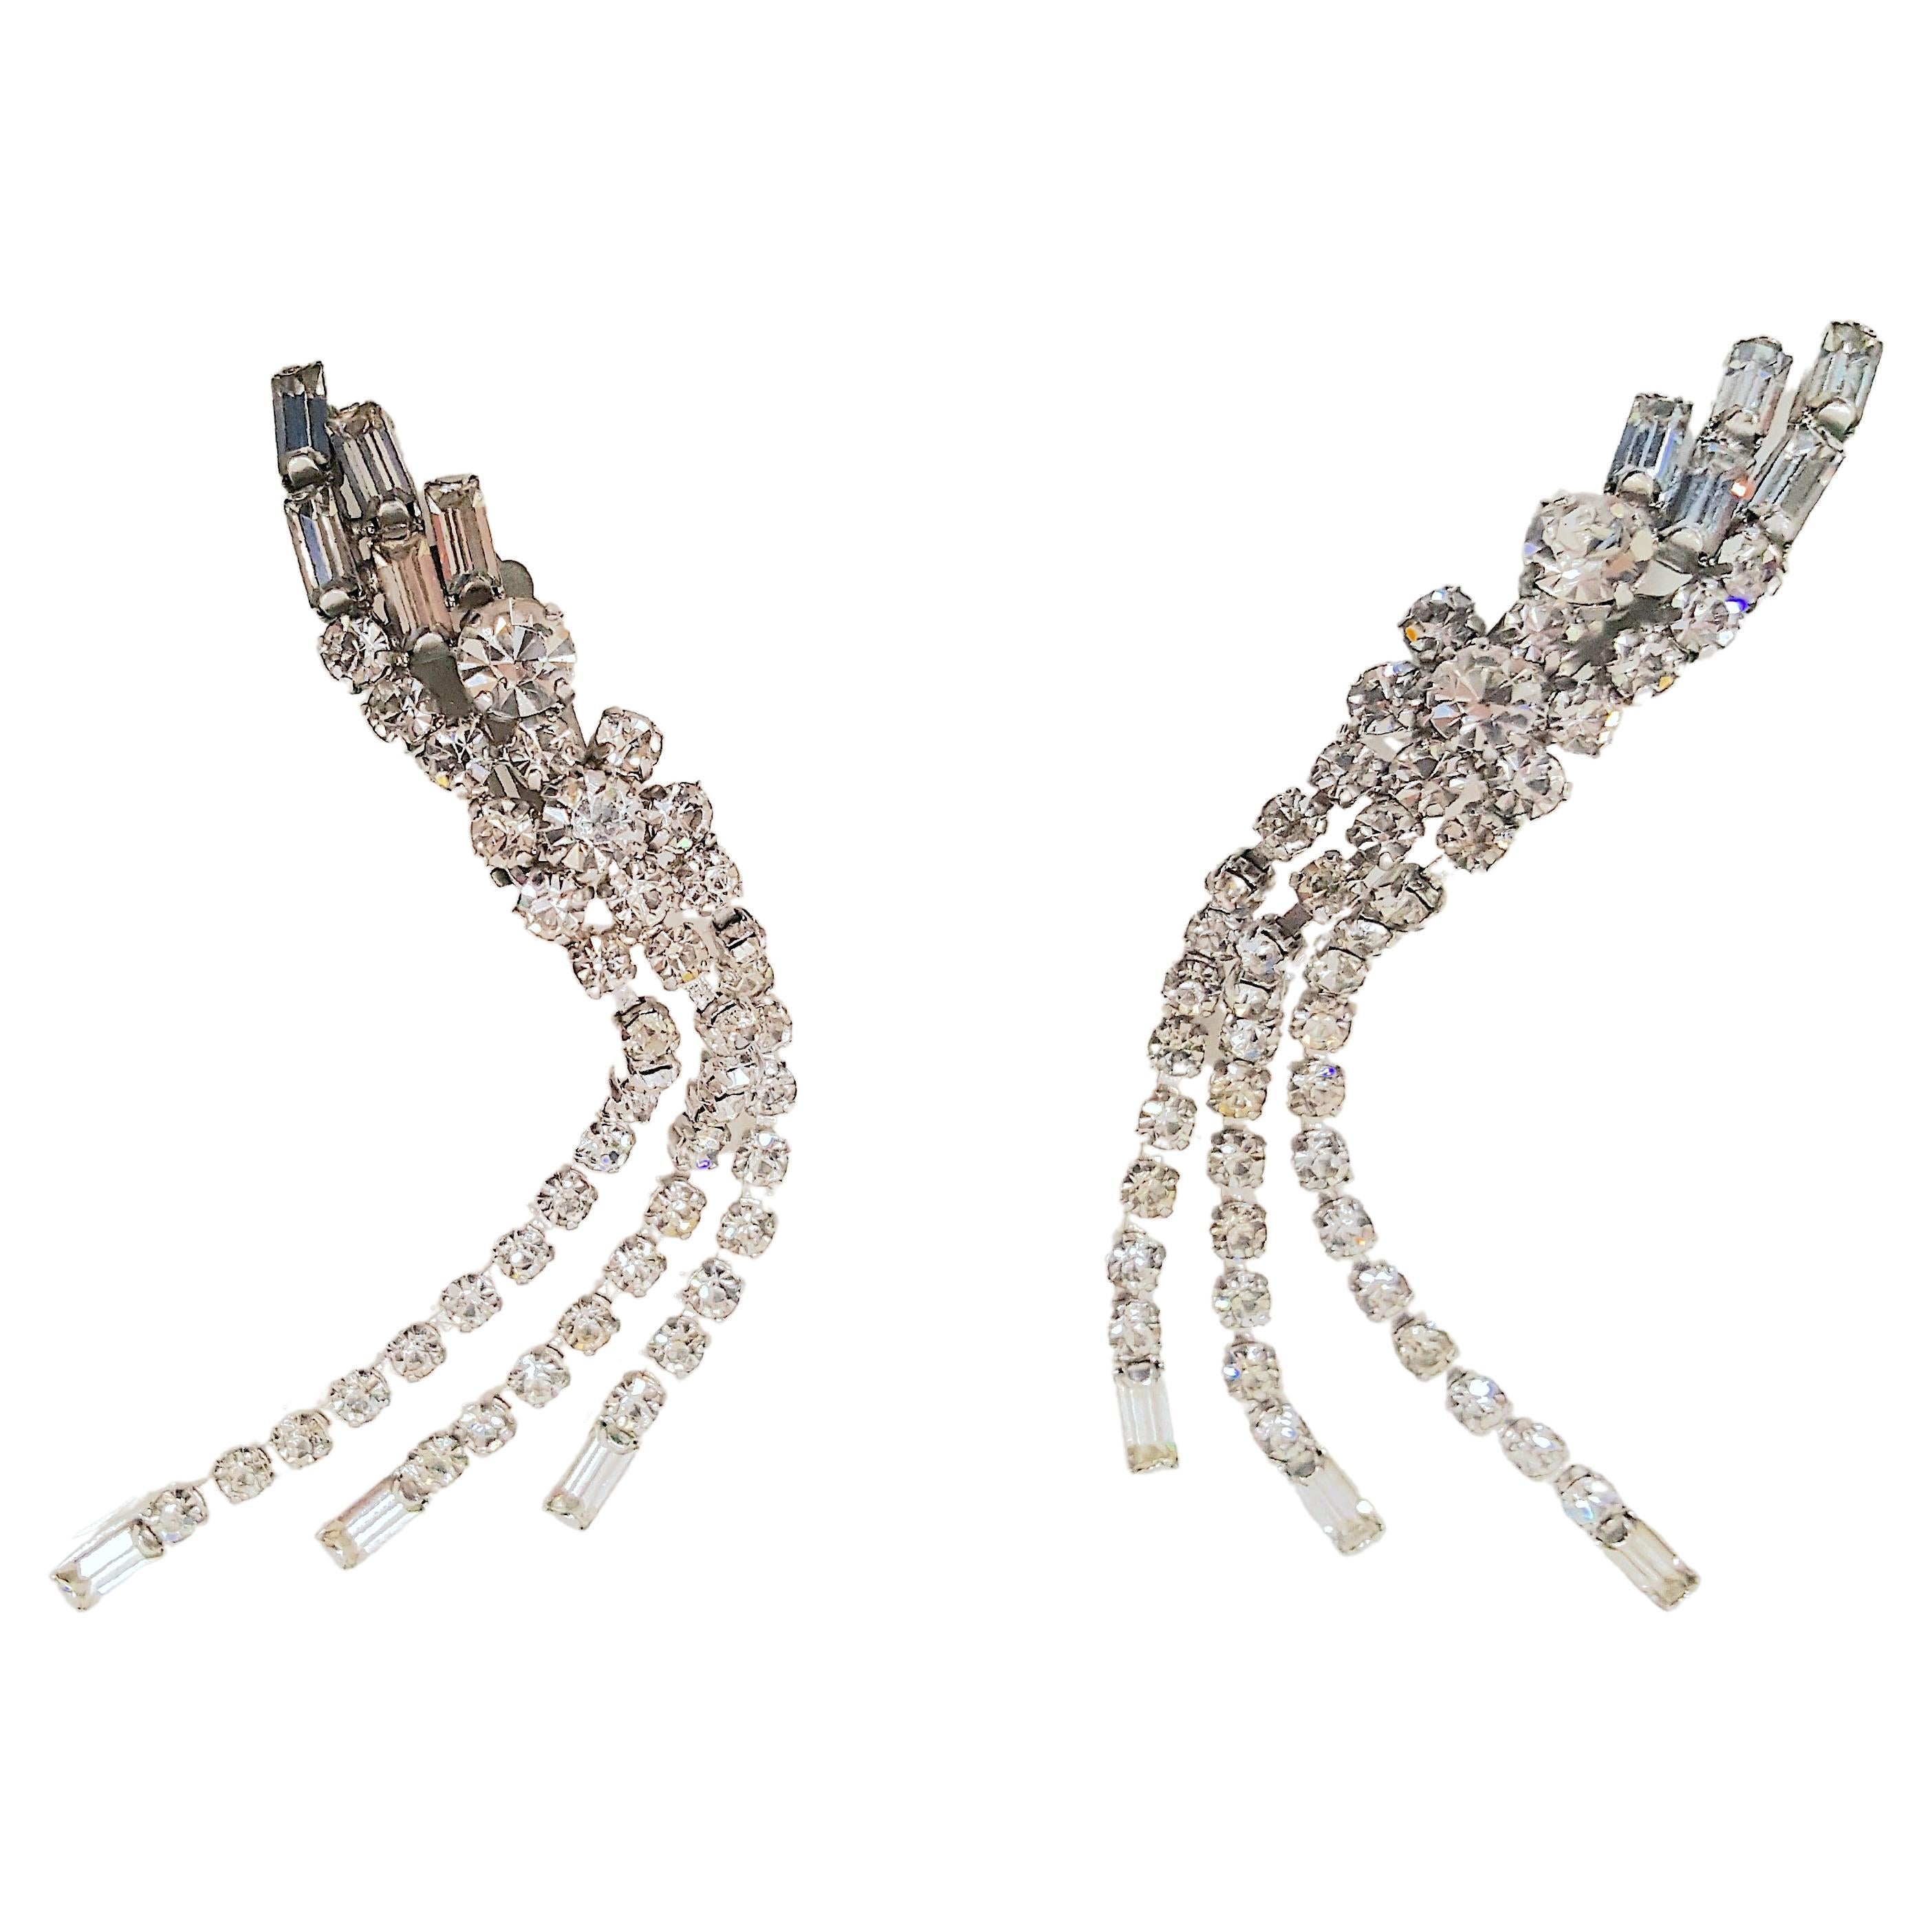 While making similar mid-century haute-couture costume jewelry for Christian Dior, designer Max Muller based near Kaufbeuren, Western Germany, created these dramatic clear-crystal silver-tone dangle earrings of graduating curvilinear sprays. When